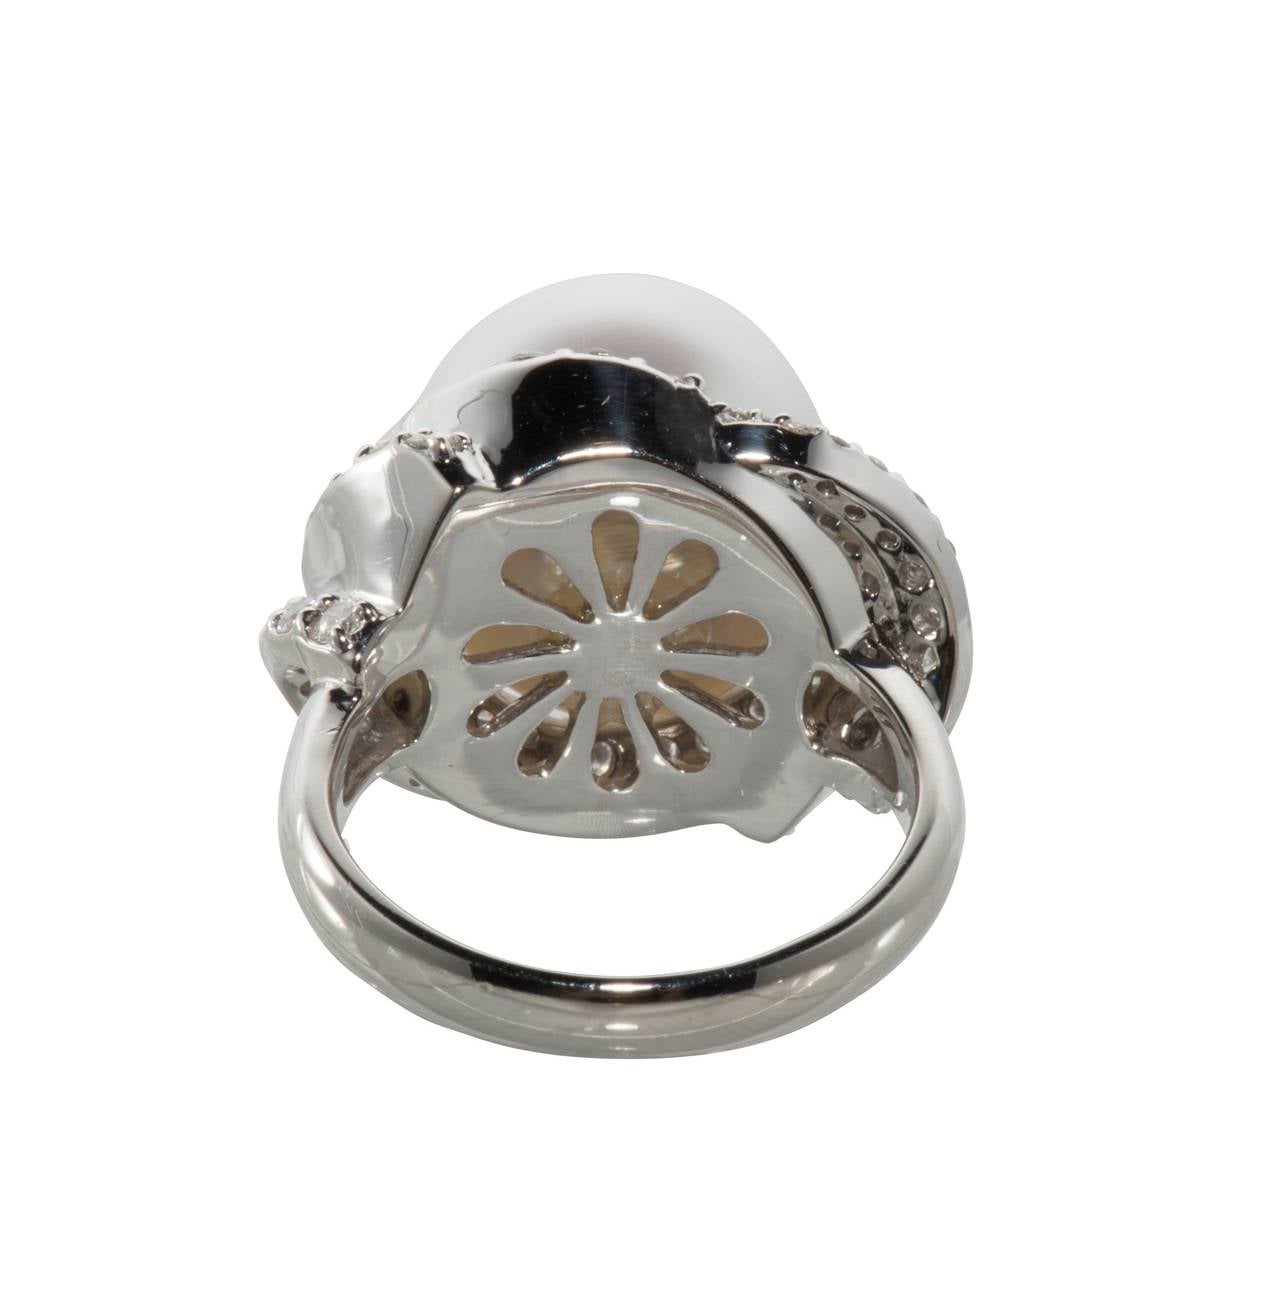 Elegant South Sea pearl and diamond cocktail ring. The pearl is 13.3mm and the diamond weight is 1ct.  It is a size 6.5 but can be easily resized.